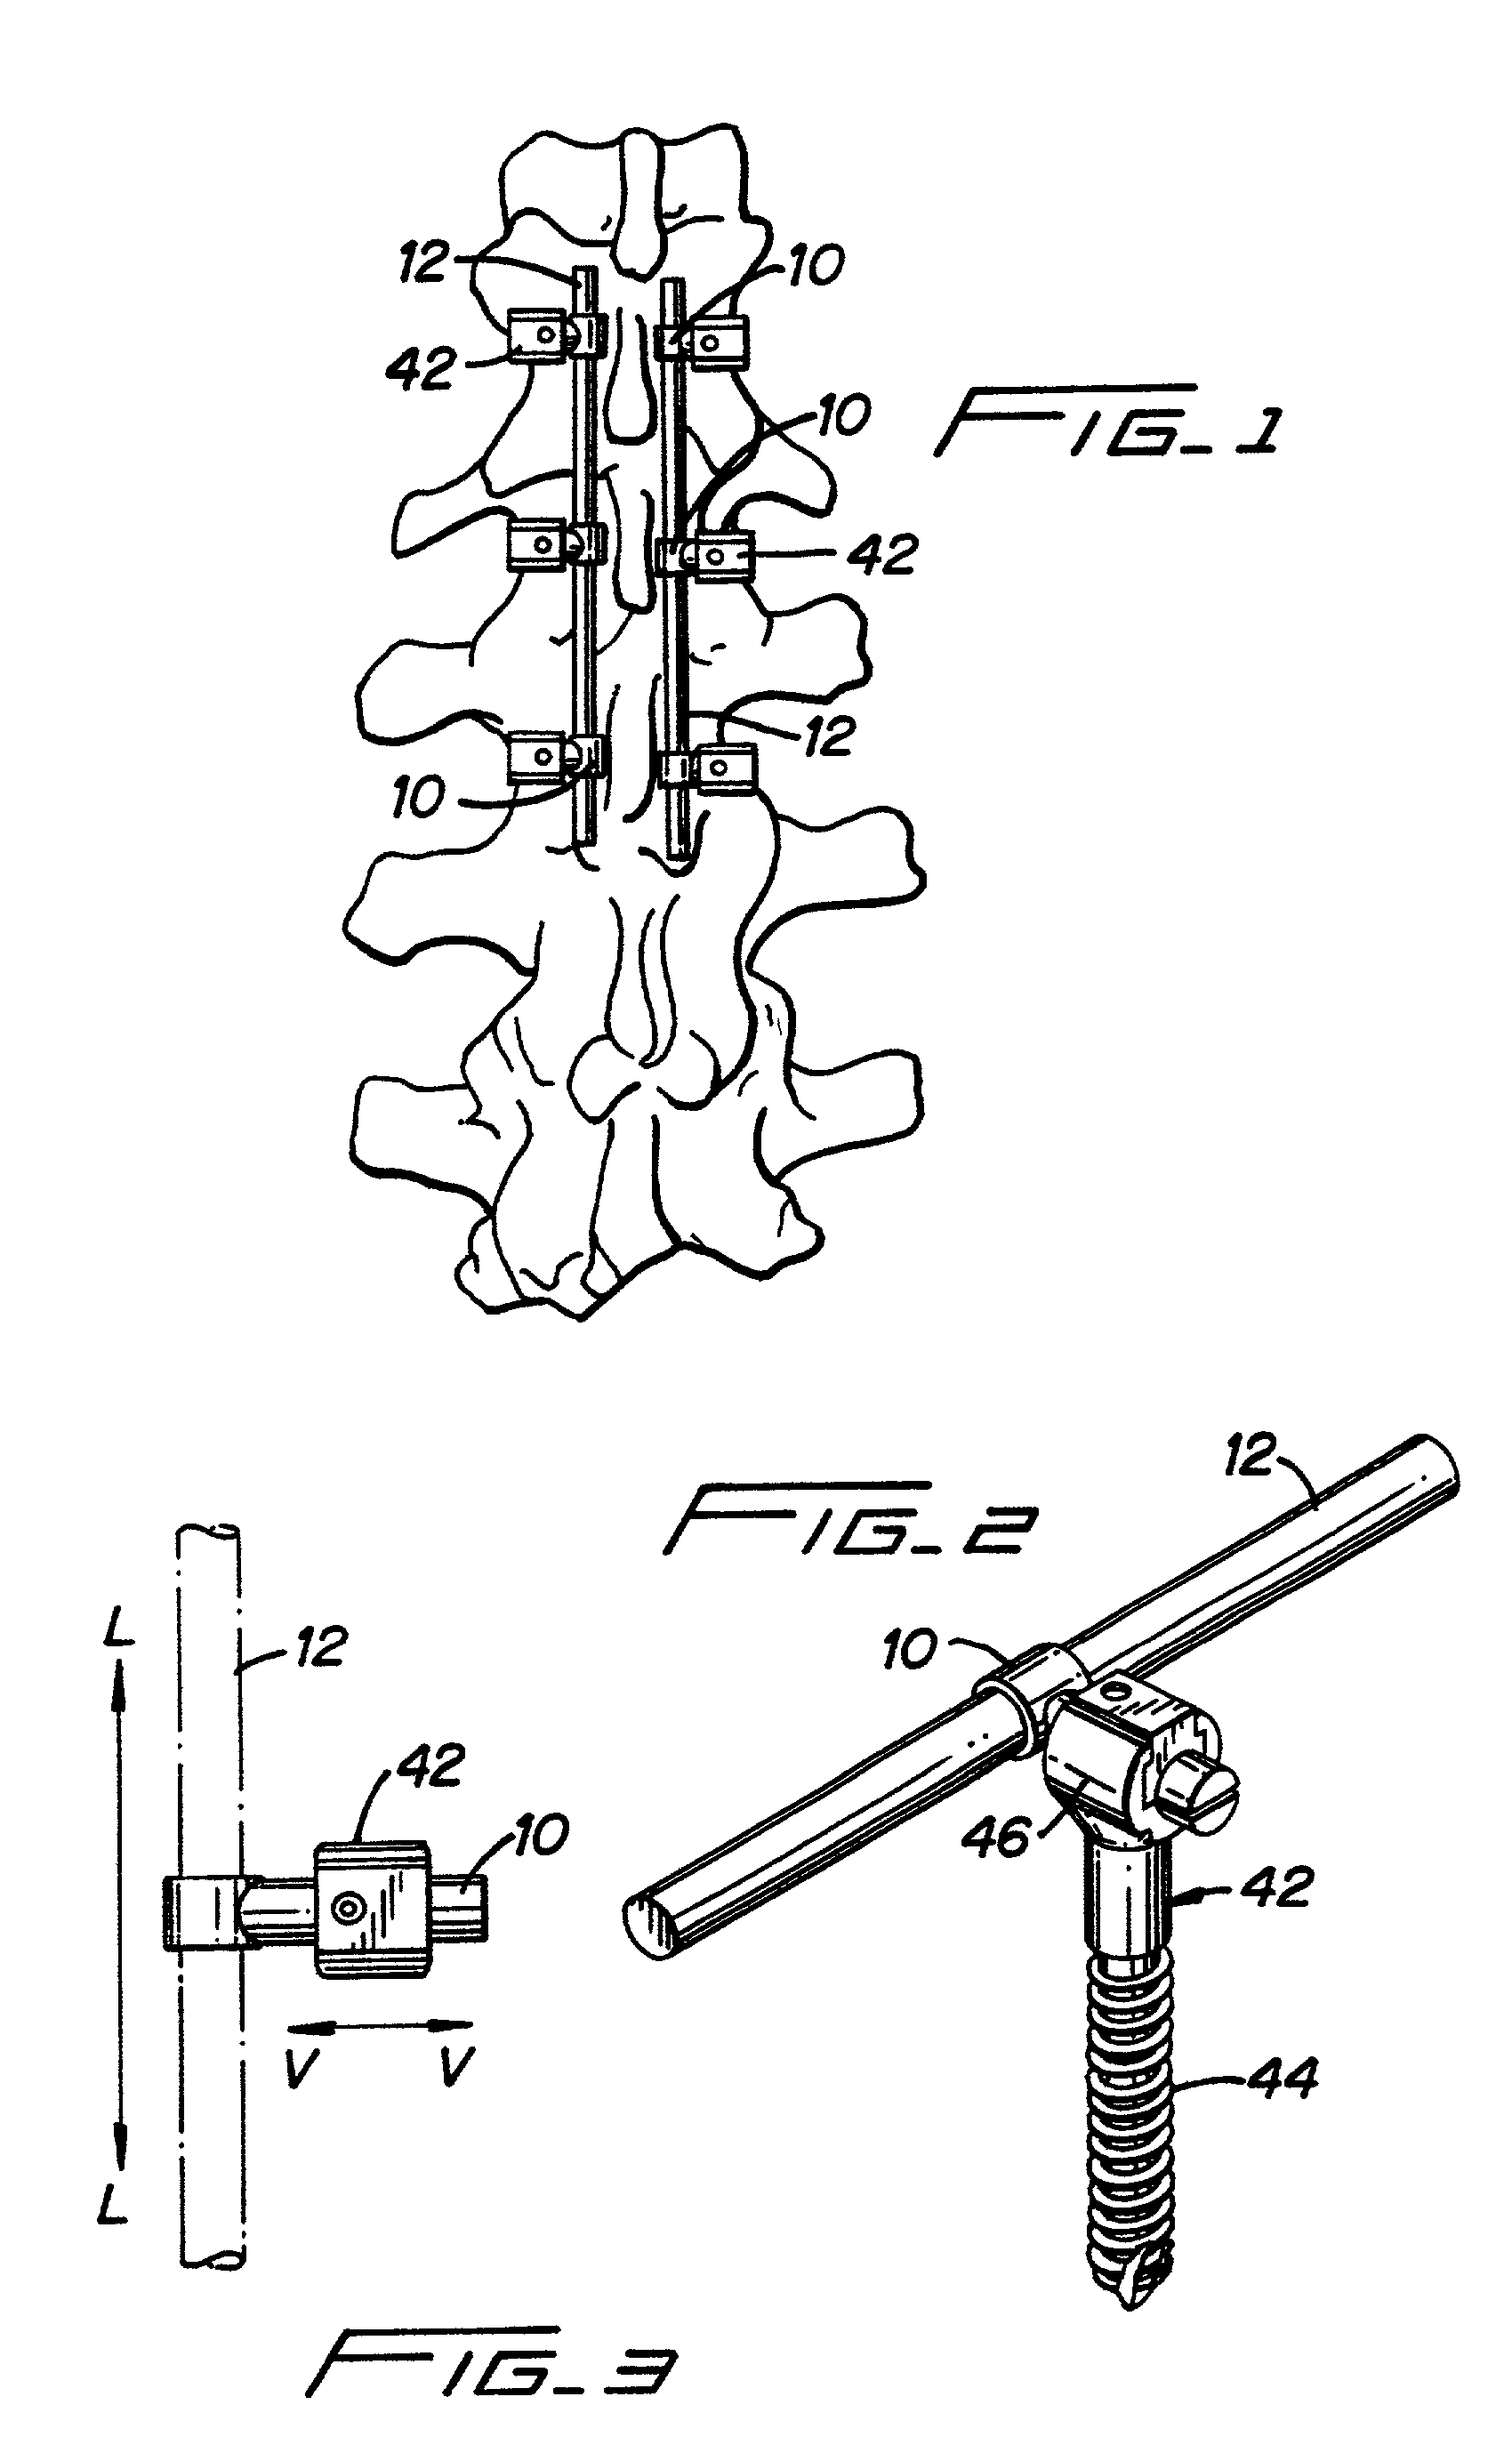 Clamping connector for spinal fixation systems